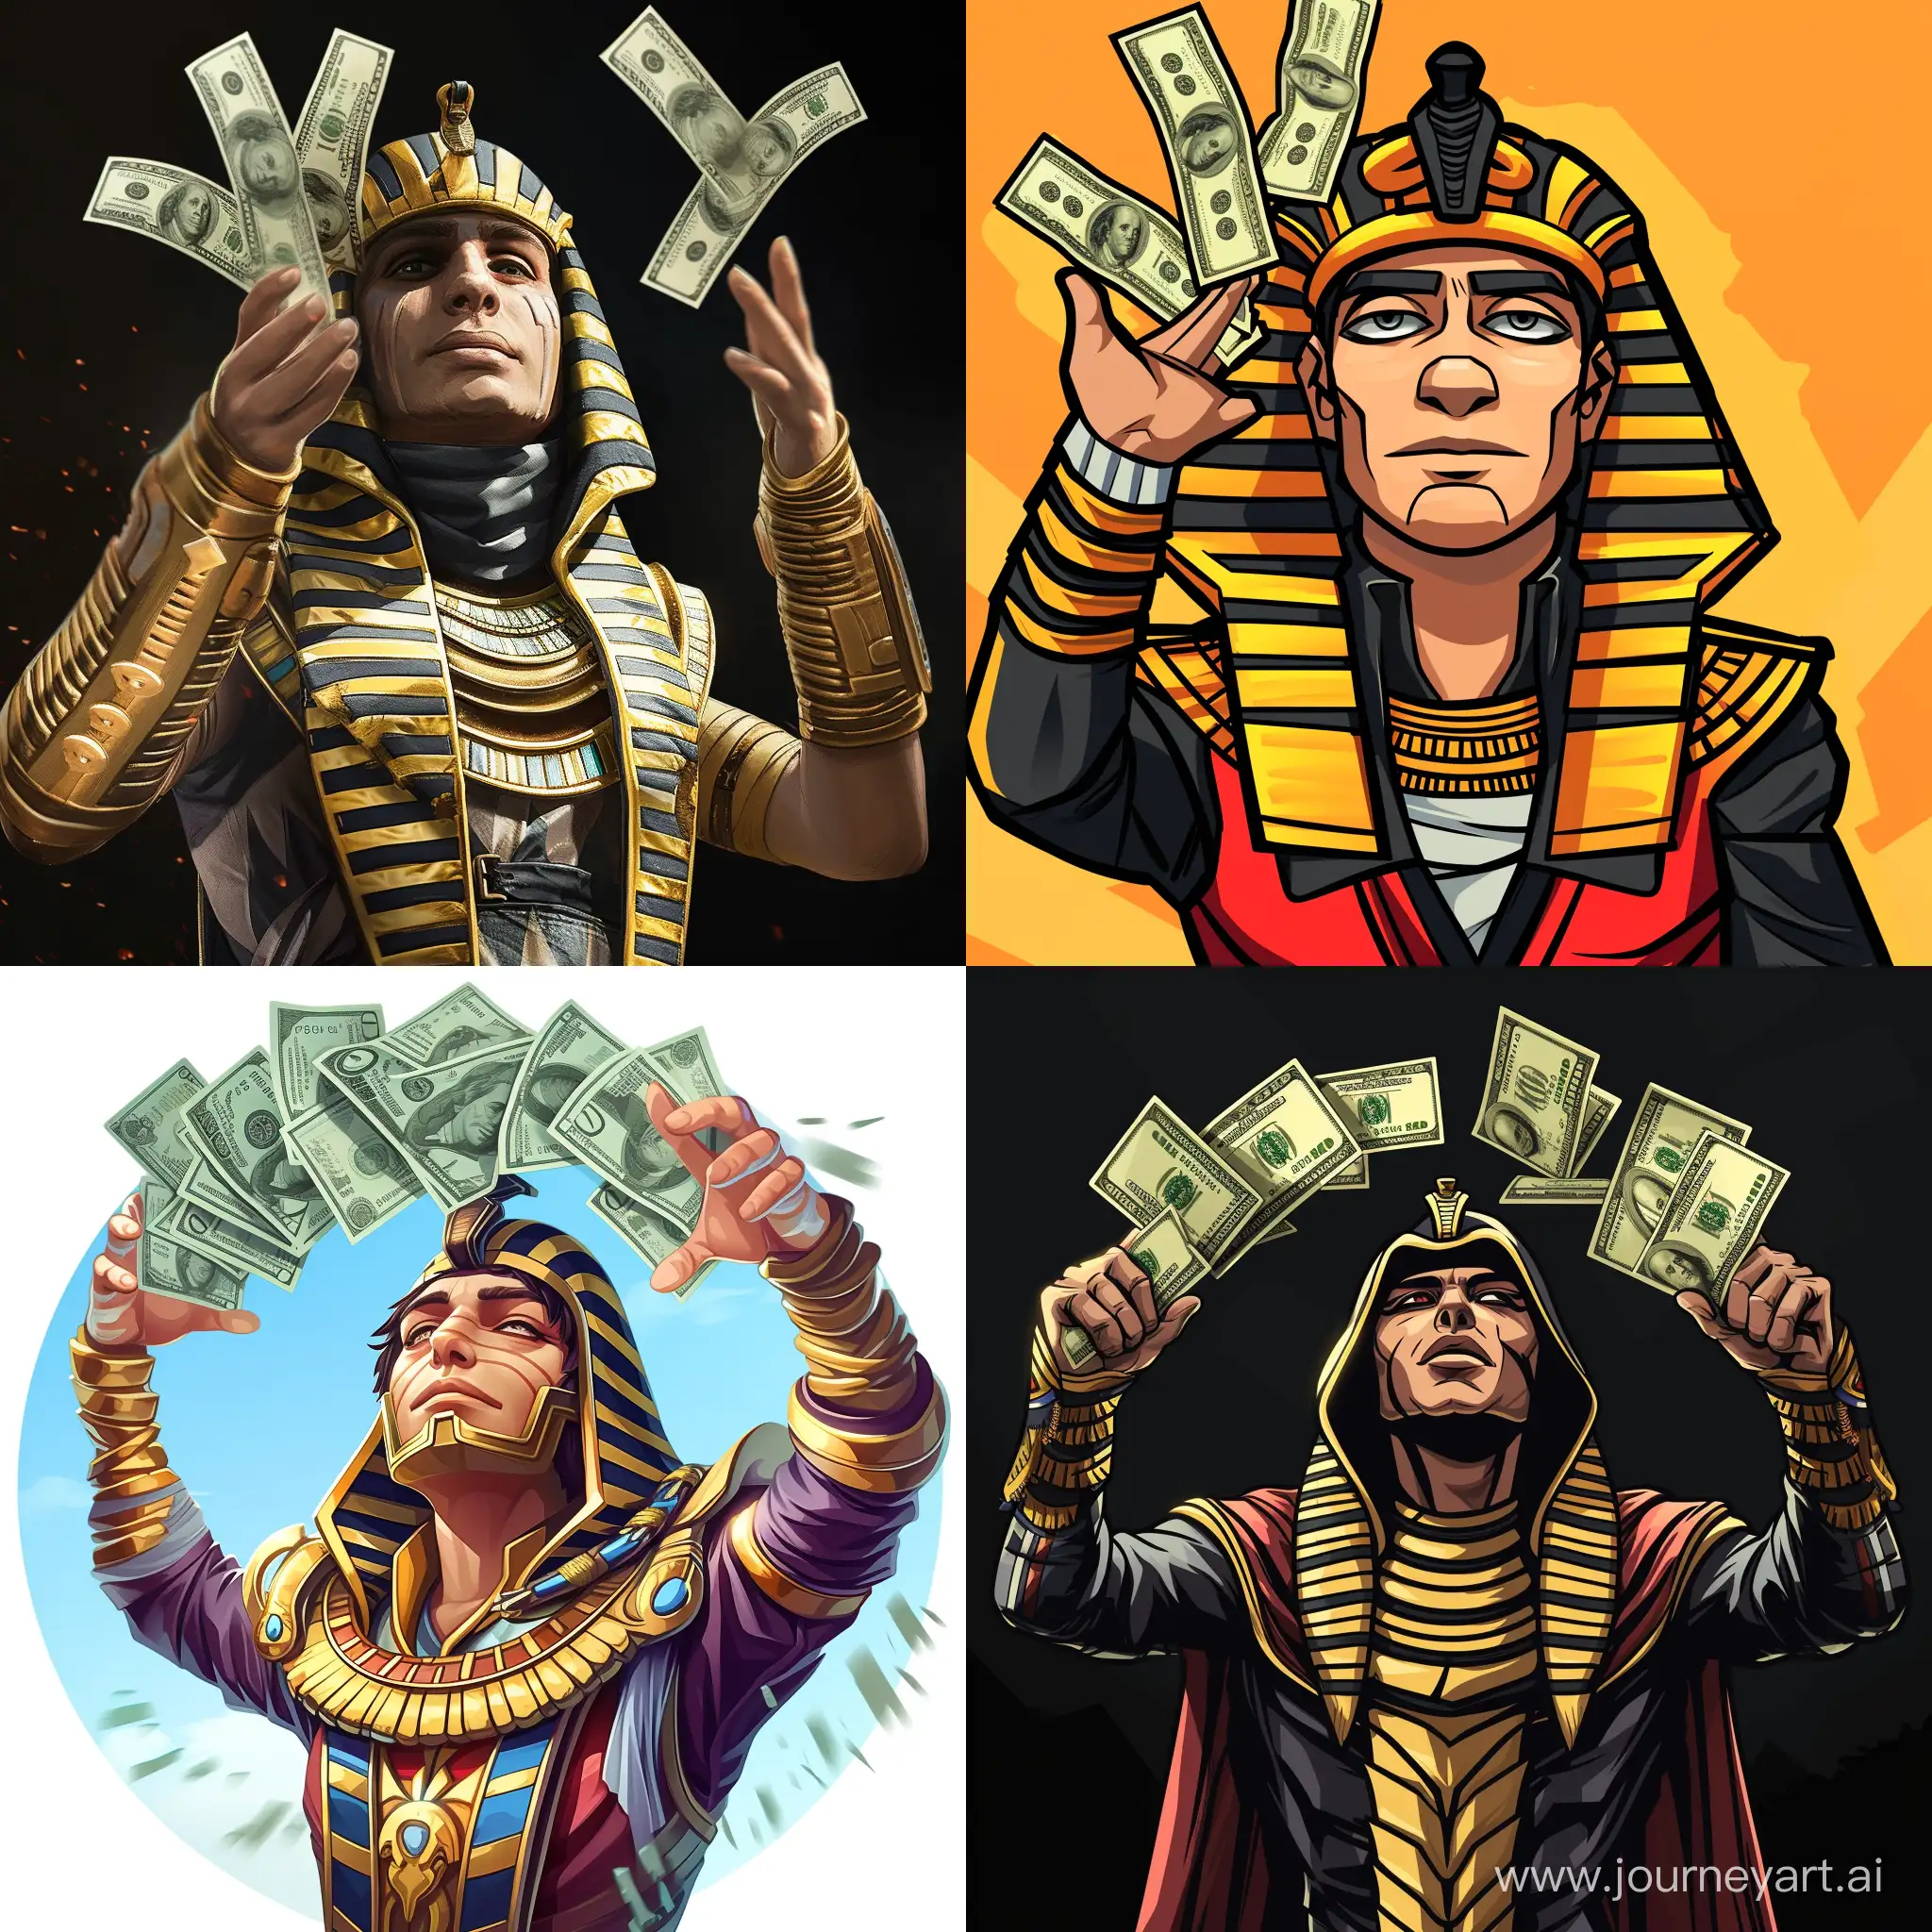 Create an image of a character dressed as Pharaoh X from PUBG Mobile. Pharaoh X is throwing up dollars, the in-game currency UC, with a serious expression on his face. gaming channel logo